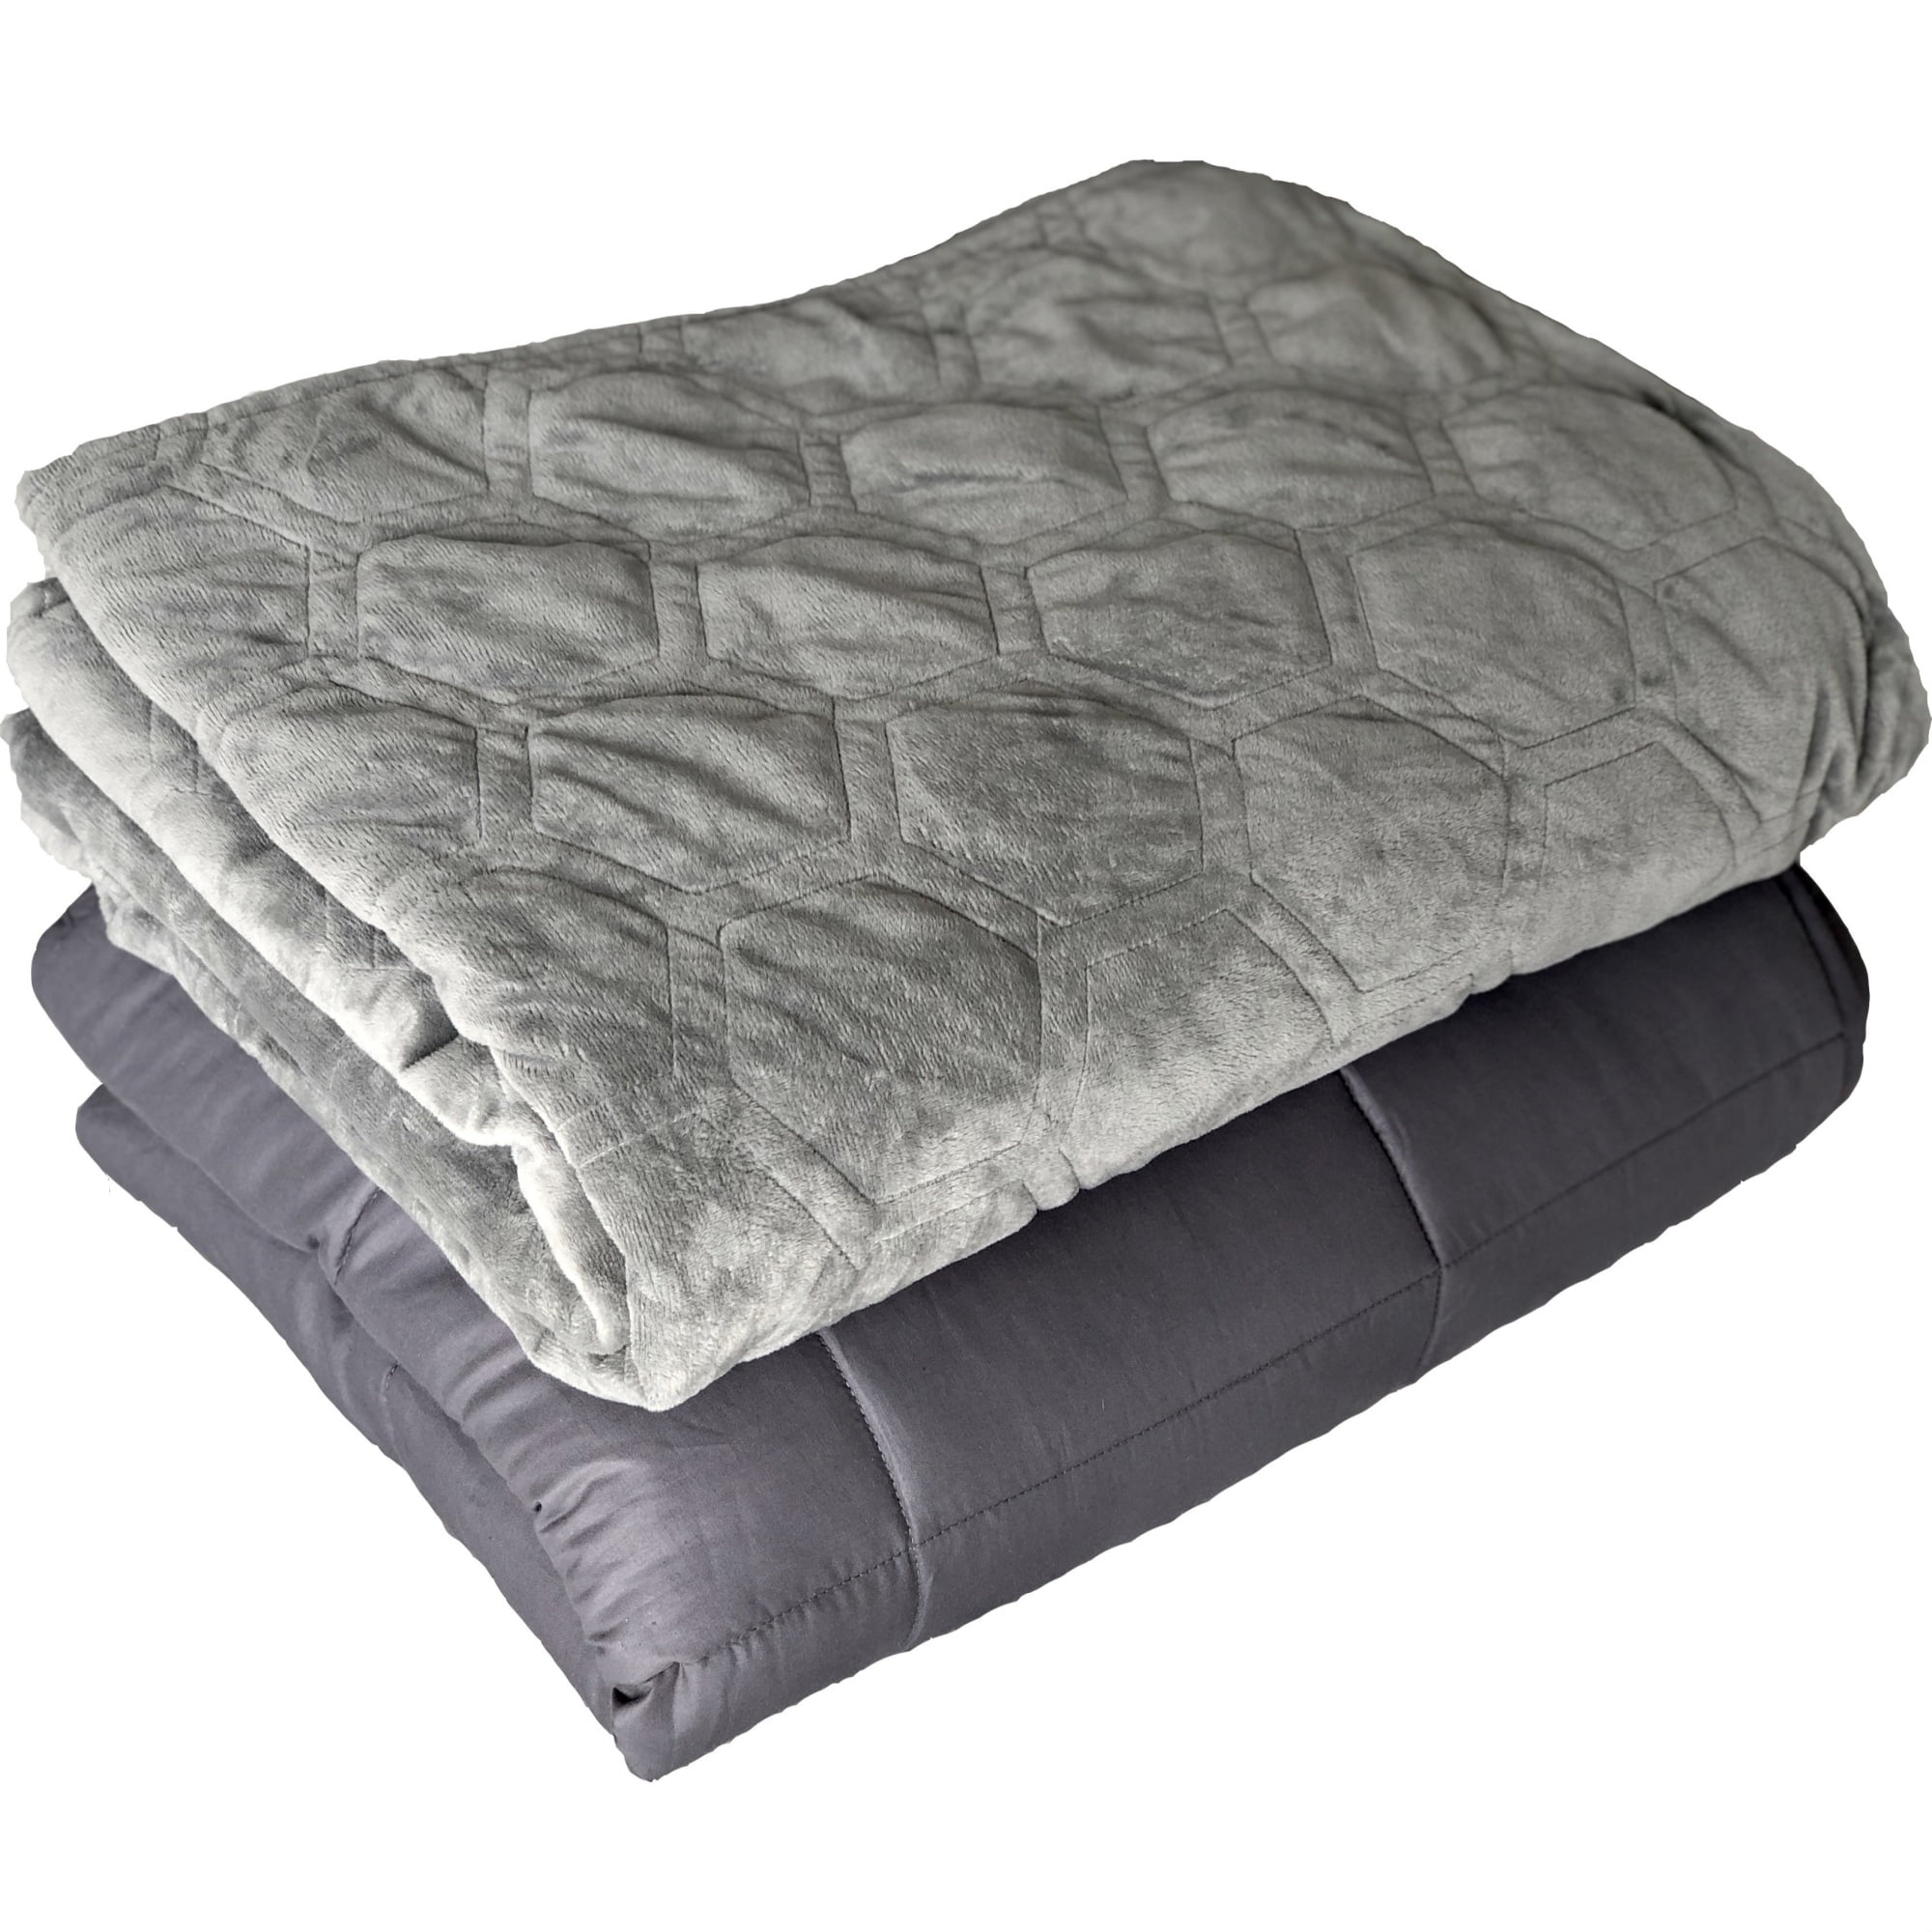 Density Comfort 25 lb. Gray Weighted Blanket 60x80 with Duvet Cover